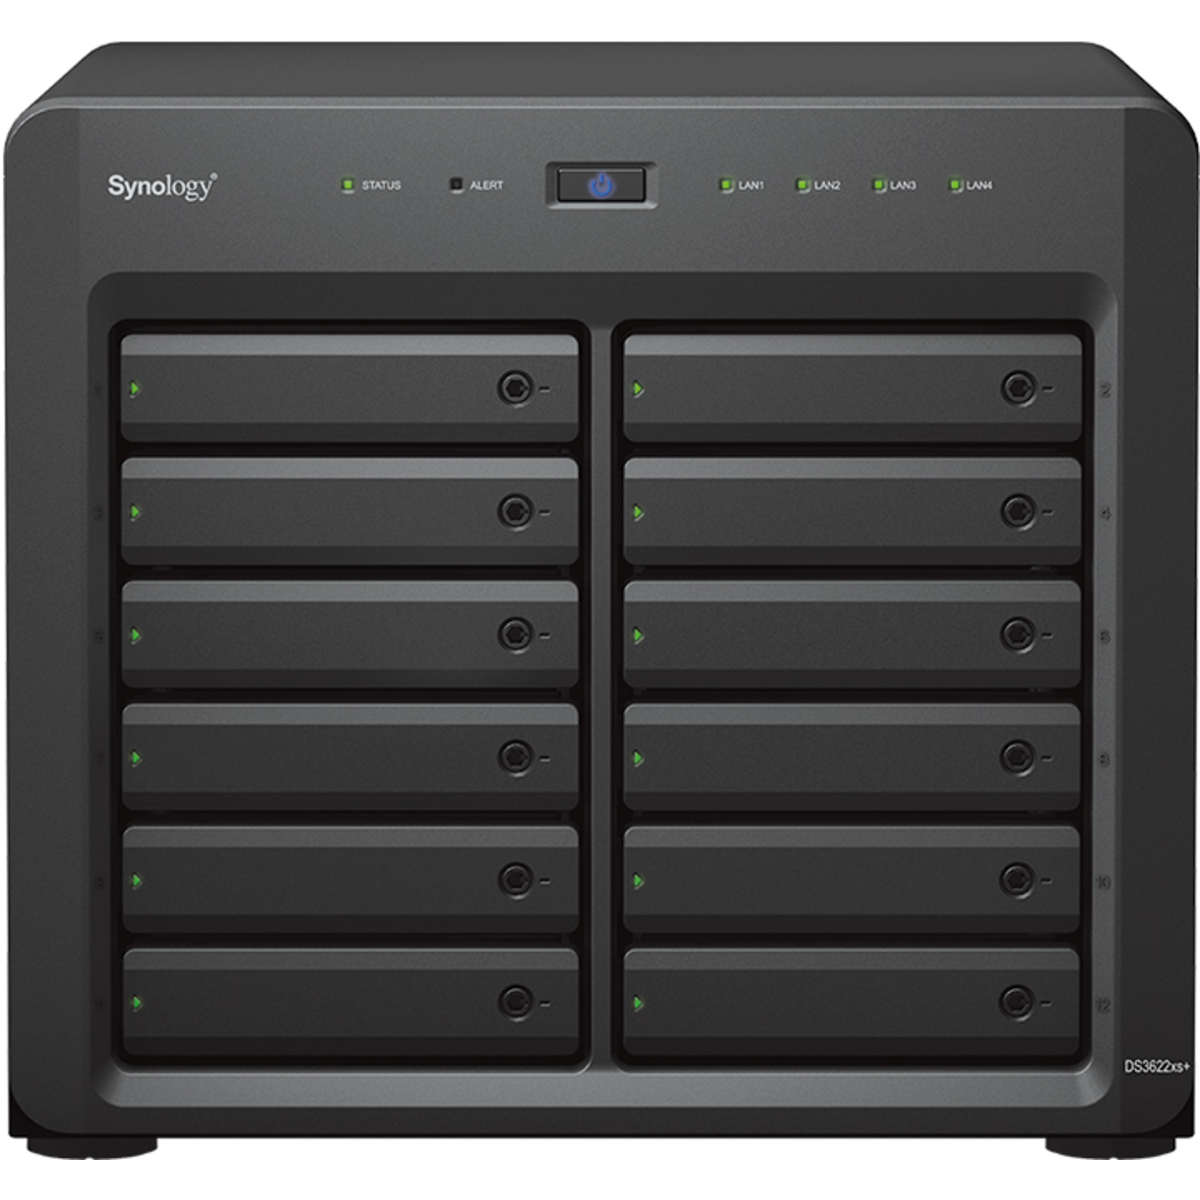 Synology DiskStation DS3622xs+ 13.4tb 12-Bay Desktop Multimedia / Power User / Business NAS - Network Attached Storage Device 7x1.9tb Synology SAT5210 Series SAT5210-1920G 2.5 530/500MB/s SATA 6Gb/s SSD ENTERPRISE Class Drives Installed - Burn-In Tested DiskStation DS3622xs+